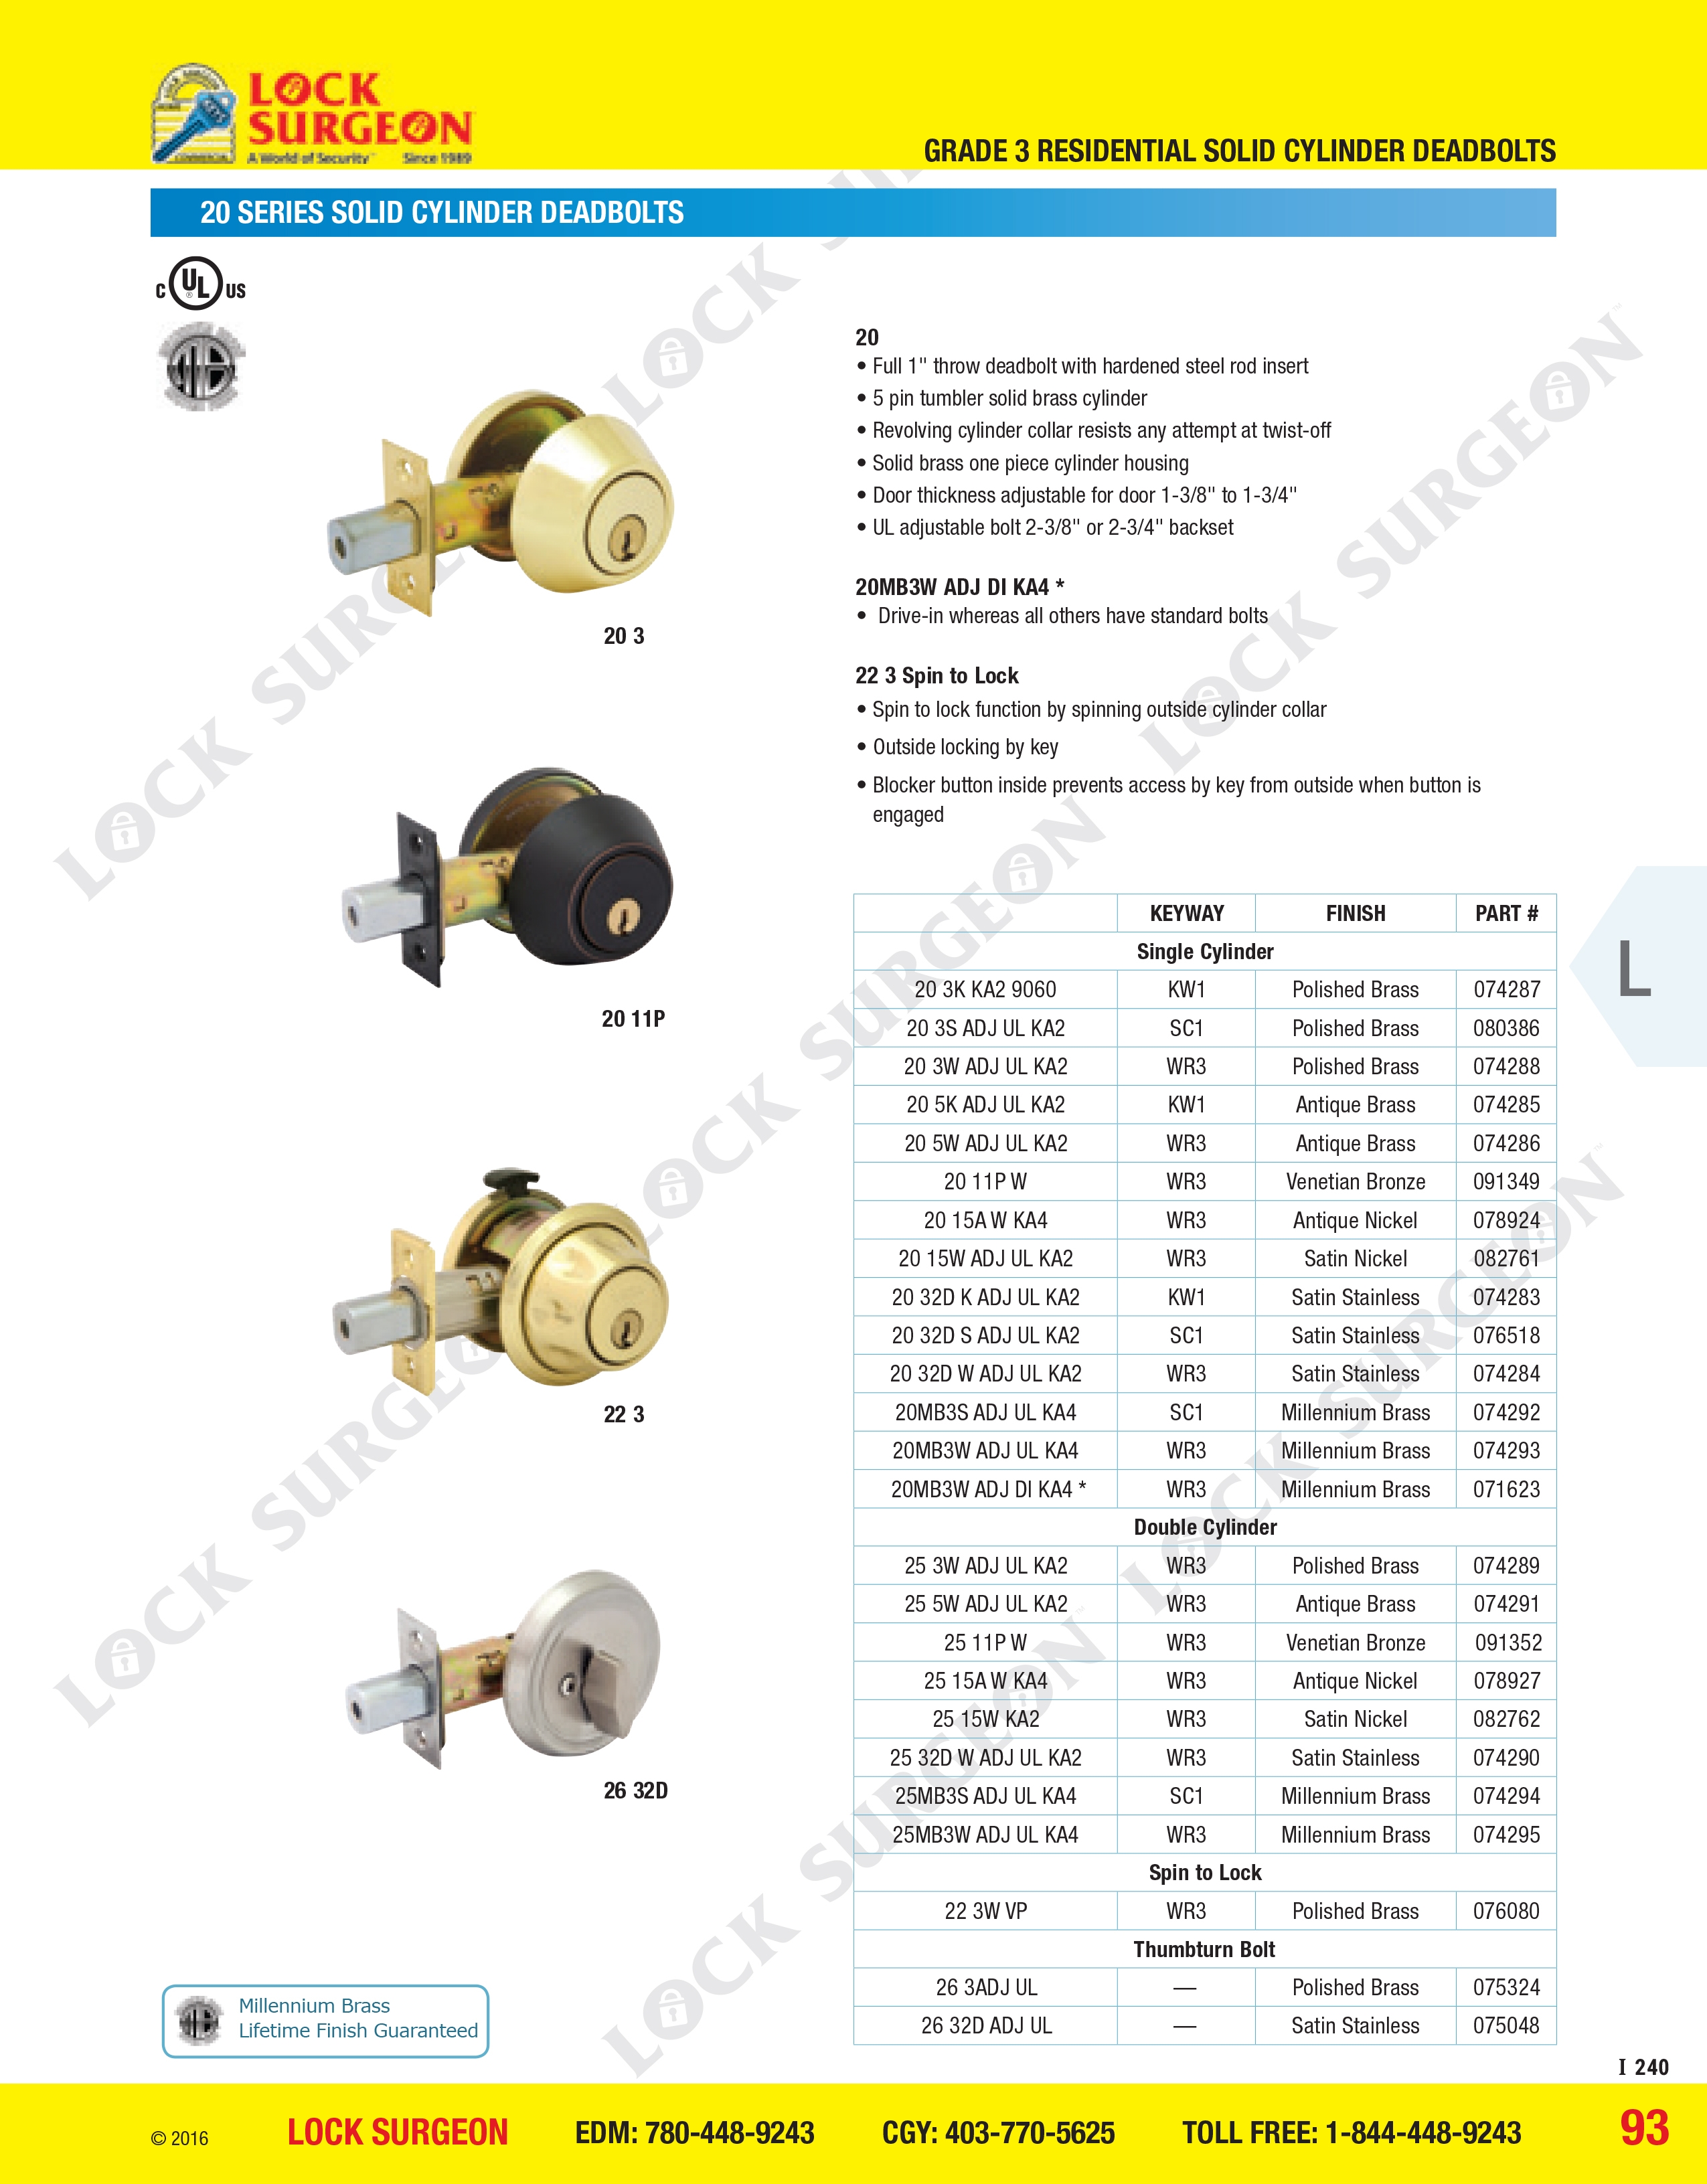 Lock Surgeon Edmonton South deadbolts for home residential use provide top of grade security.